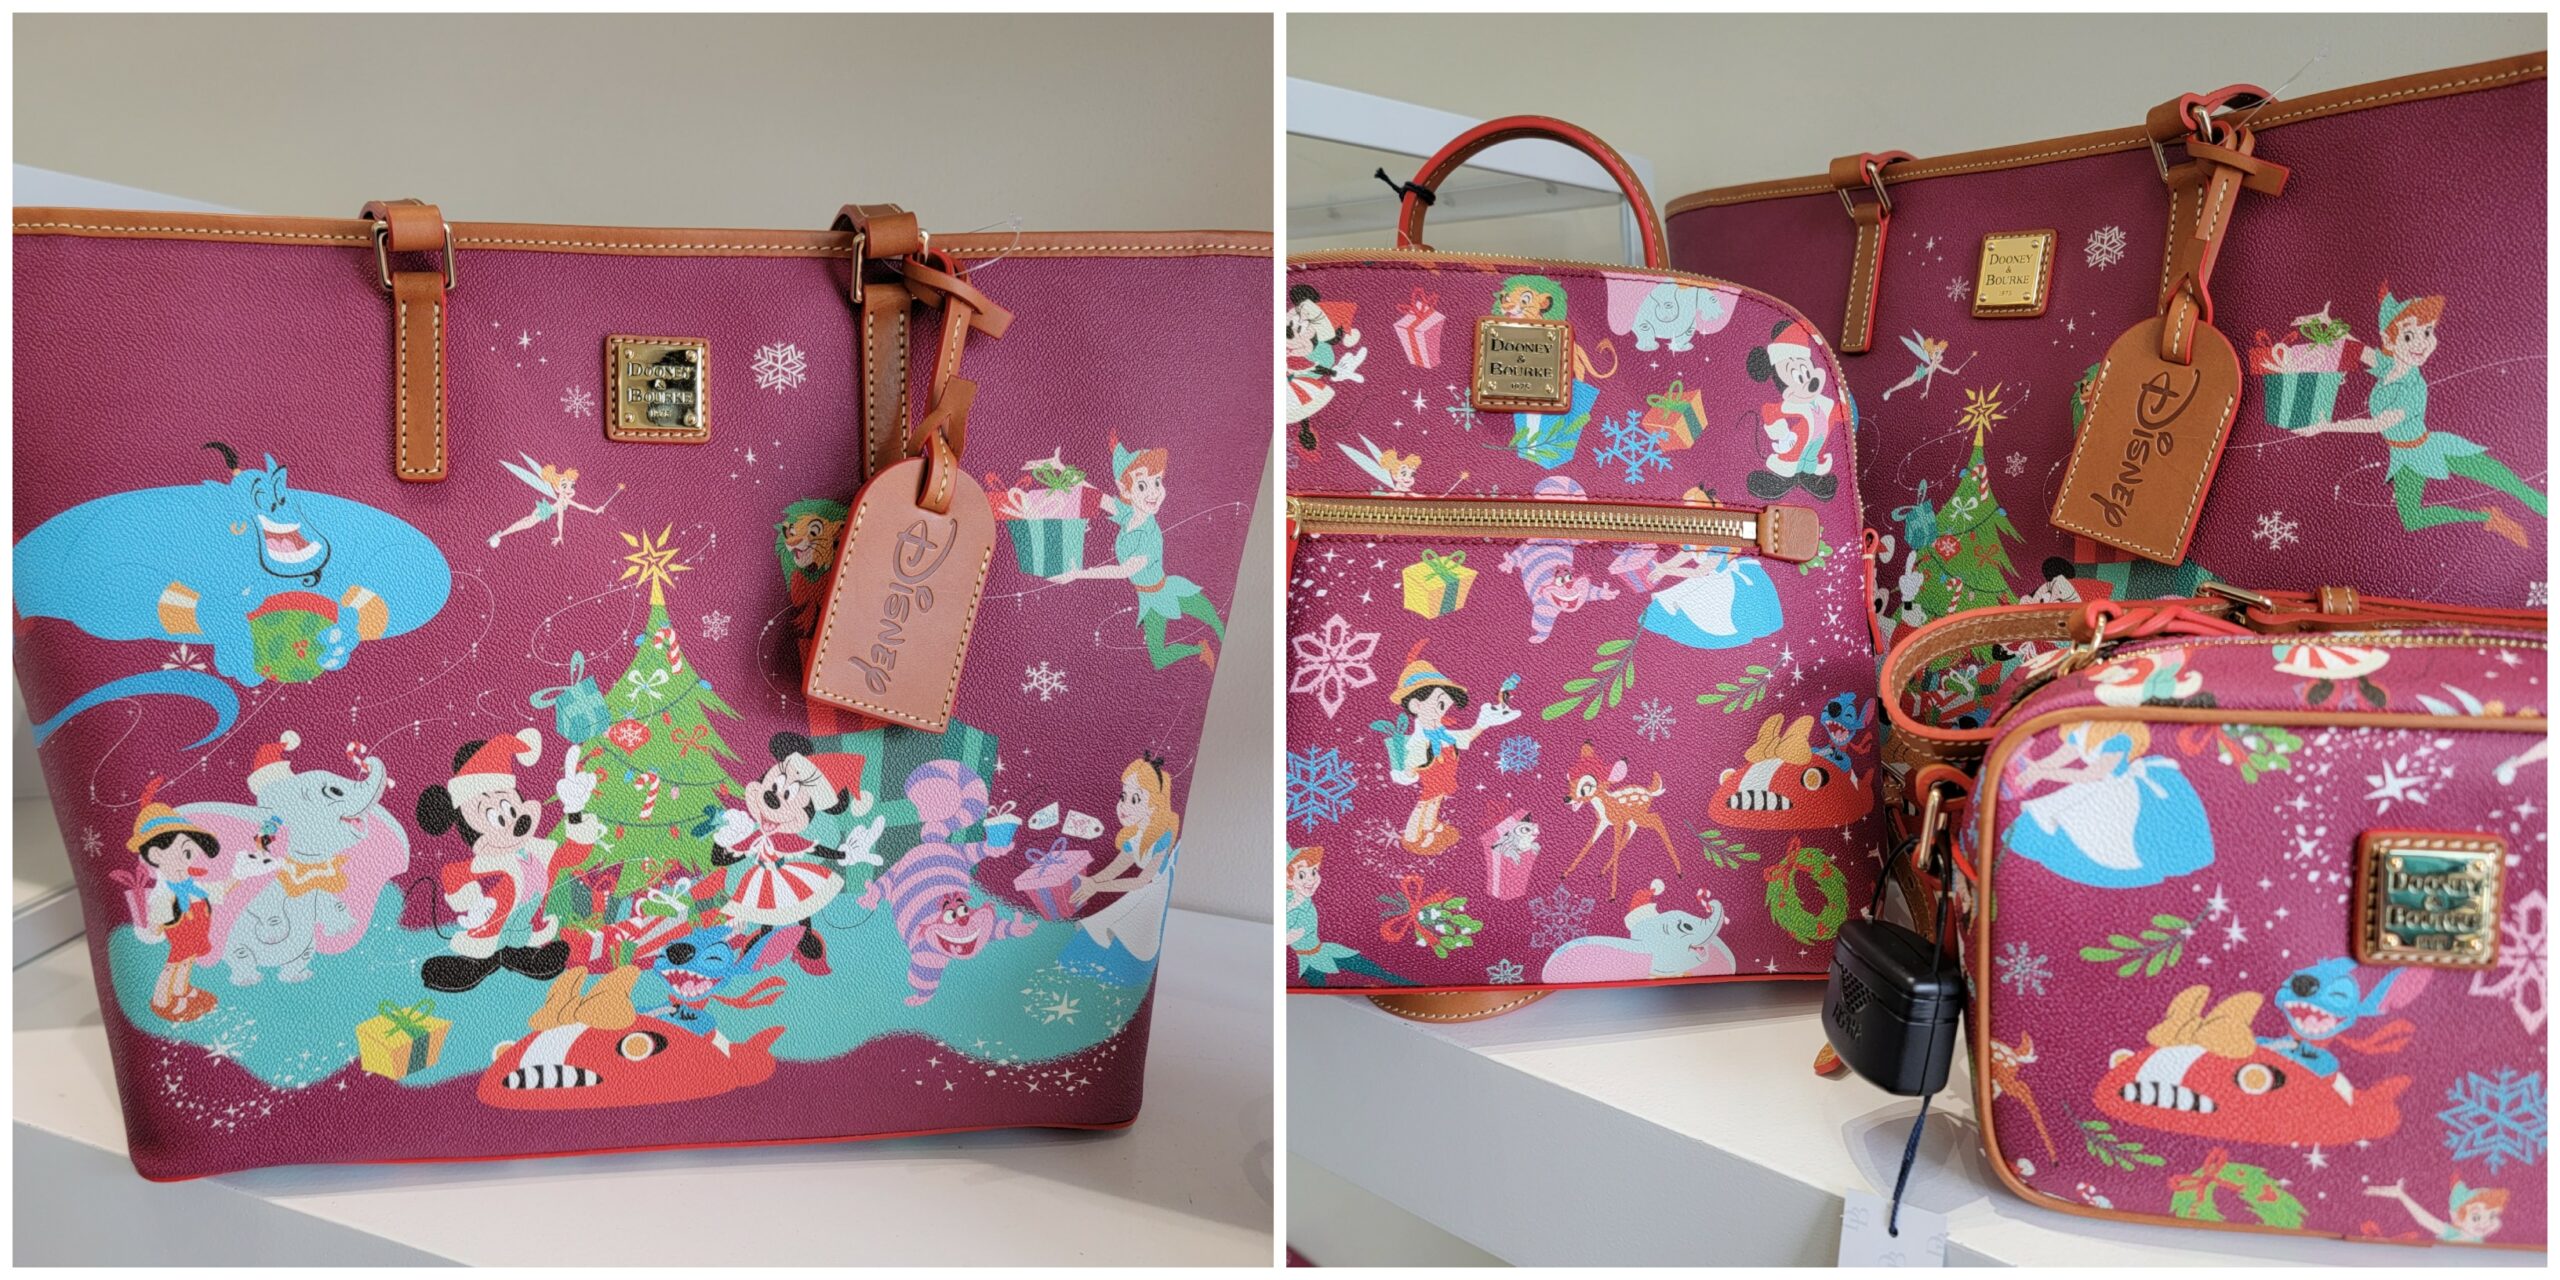 Check Out the NEW Disney100 Partners Dooney & Bourke Tote Bag 